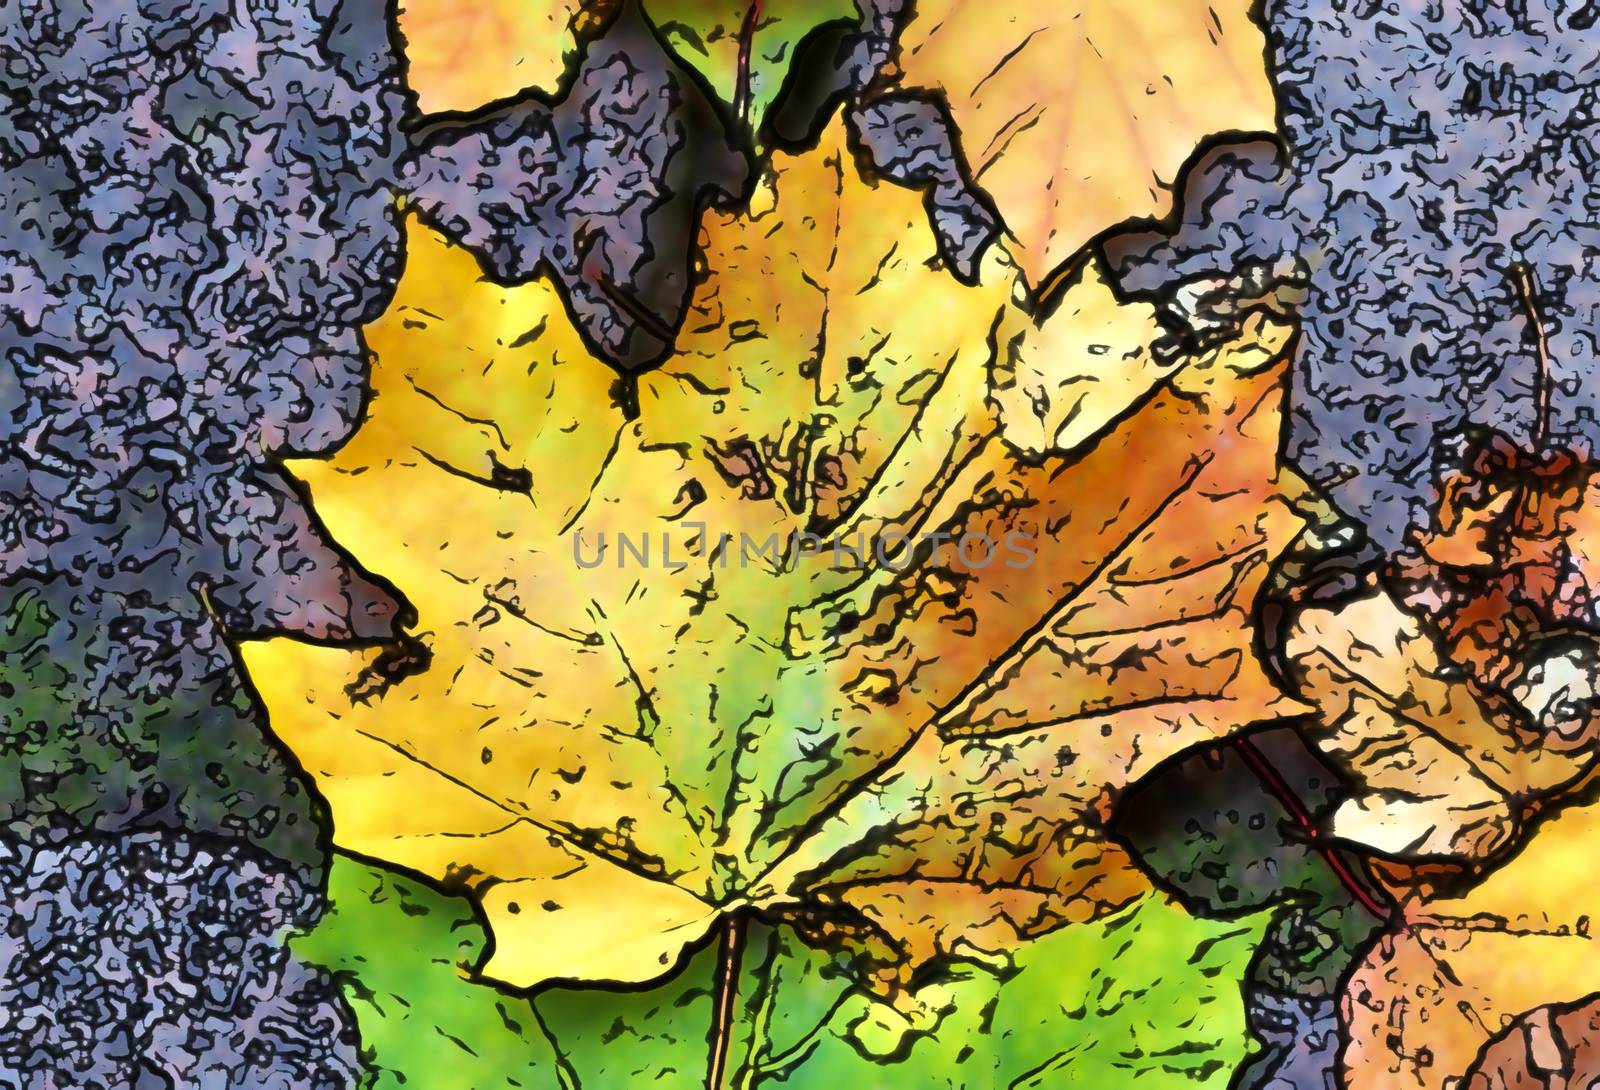 Comic style painting of colorful autumn leaves for backgrounds or textures